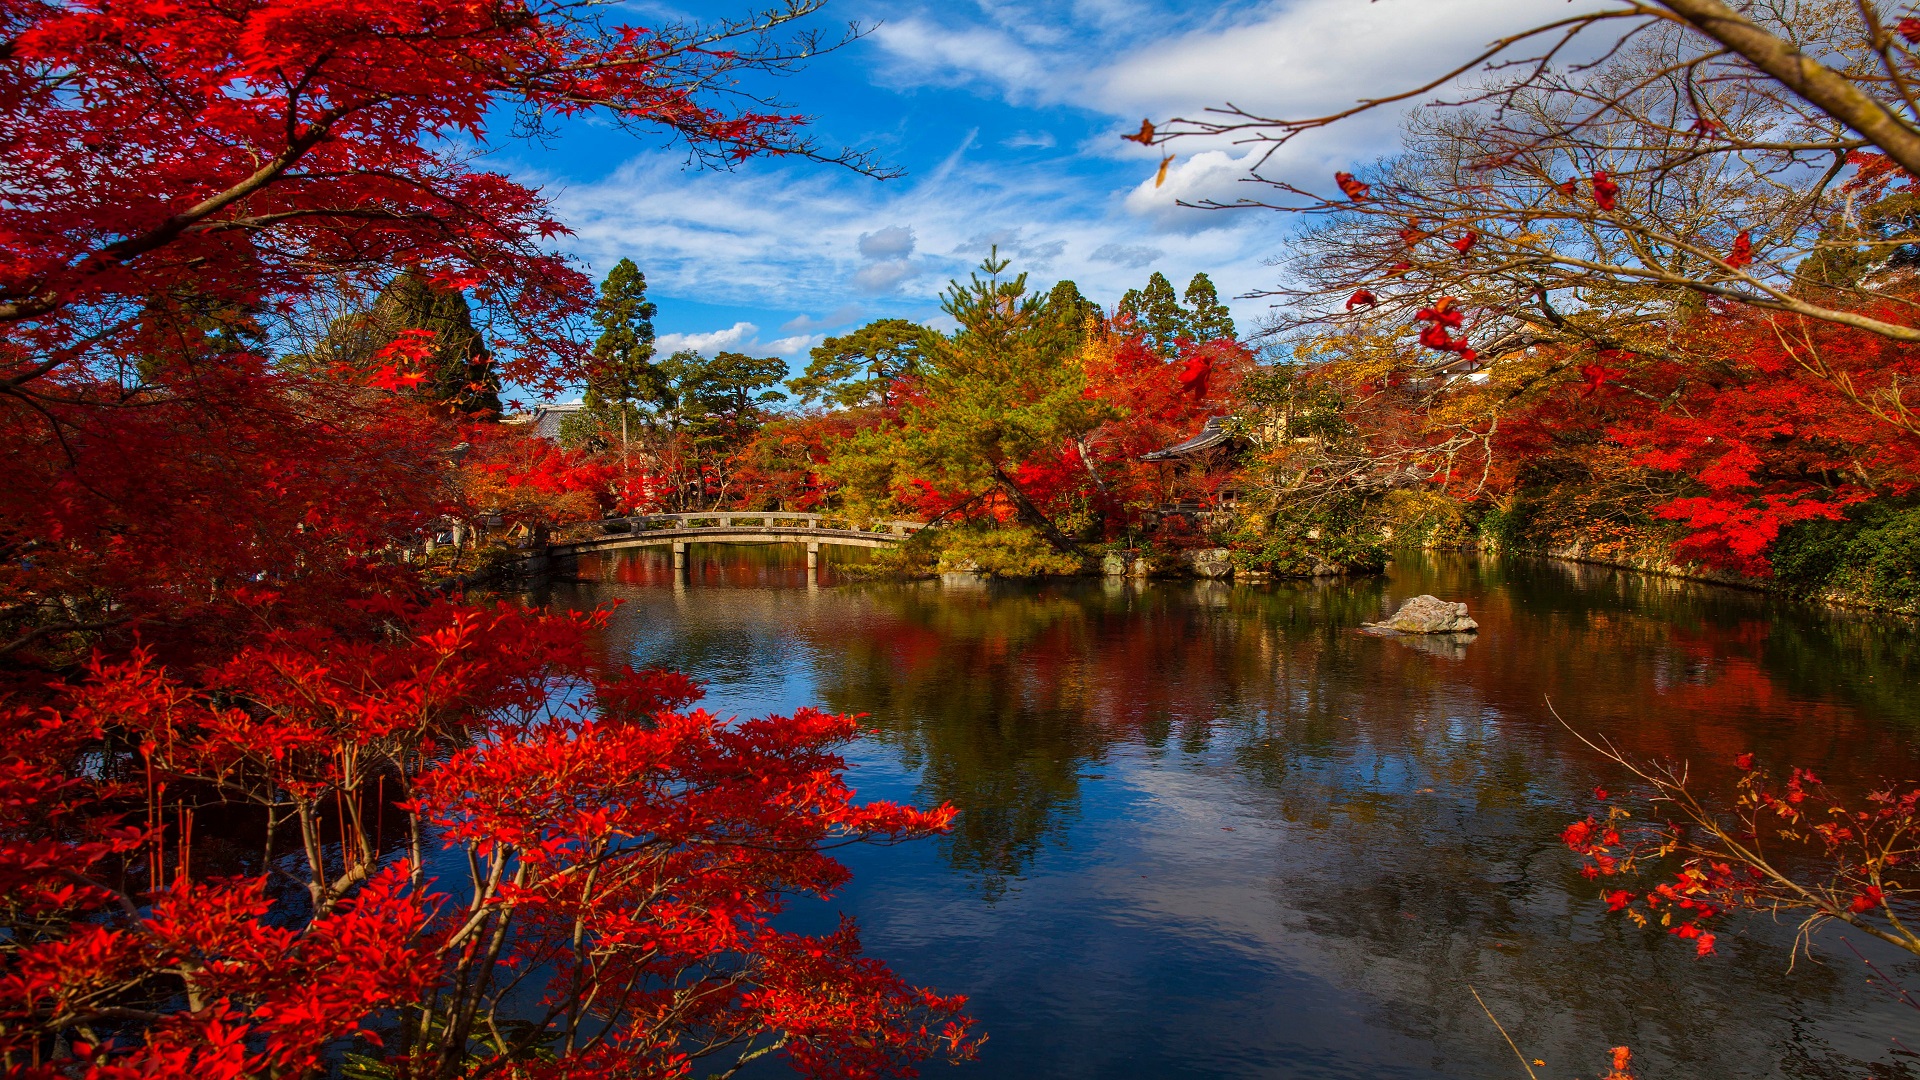 4k Japan Scenery Wallpaper and HD Background free download on PicGaGa